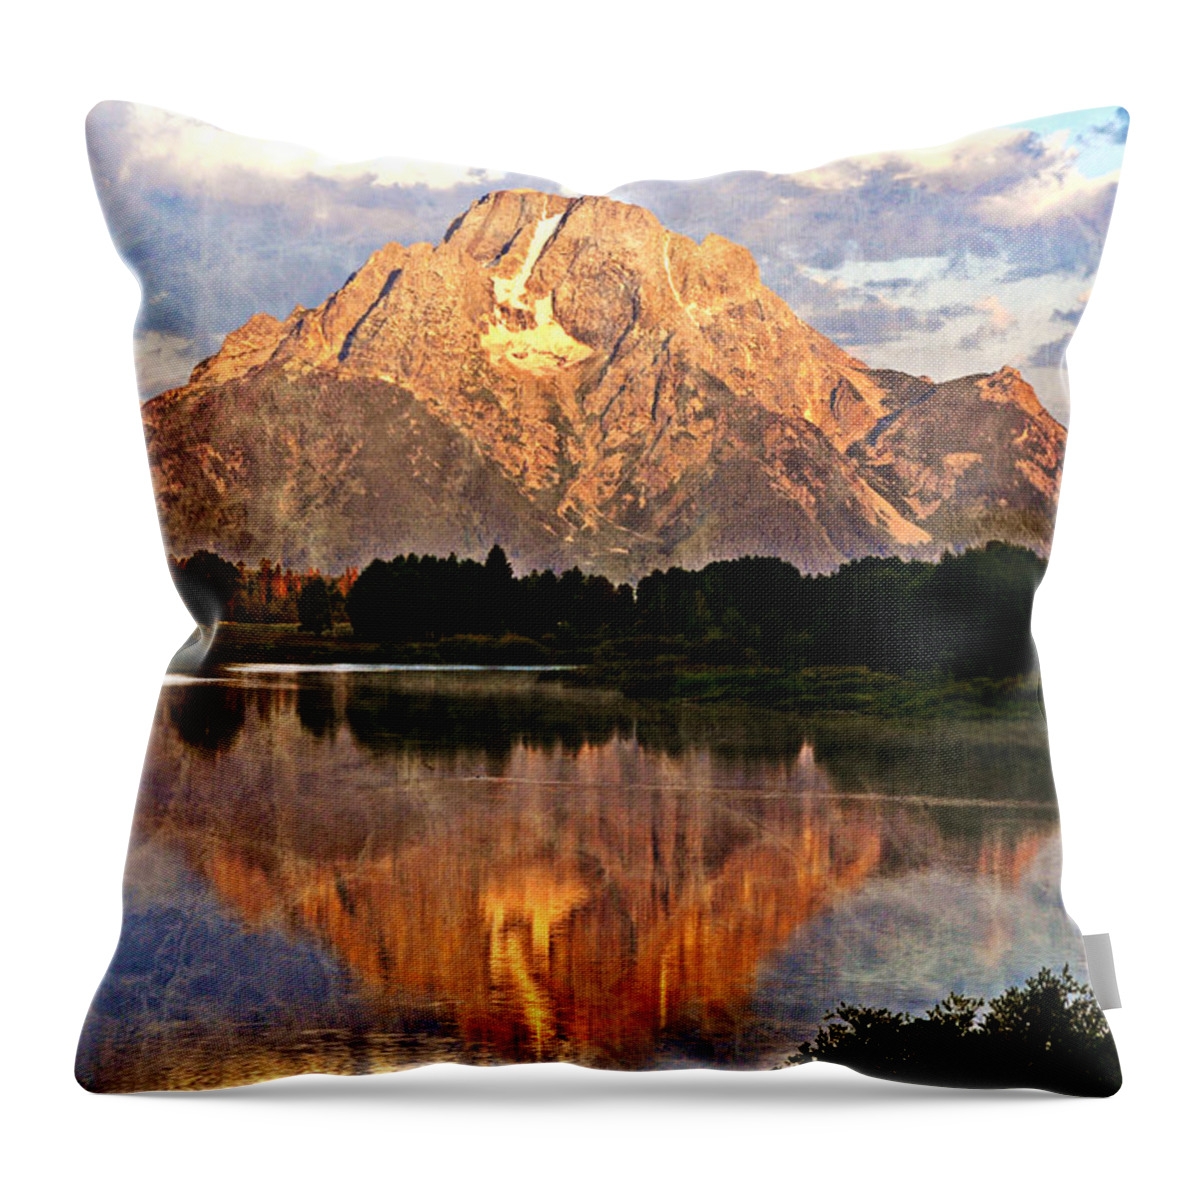 Grand Teton National Park Throw Pillow featuring the photograph Oxbow Bend by Marty Koch